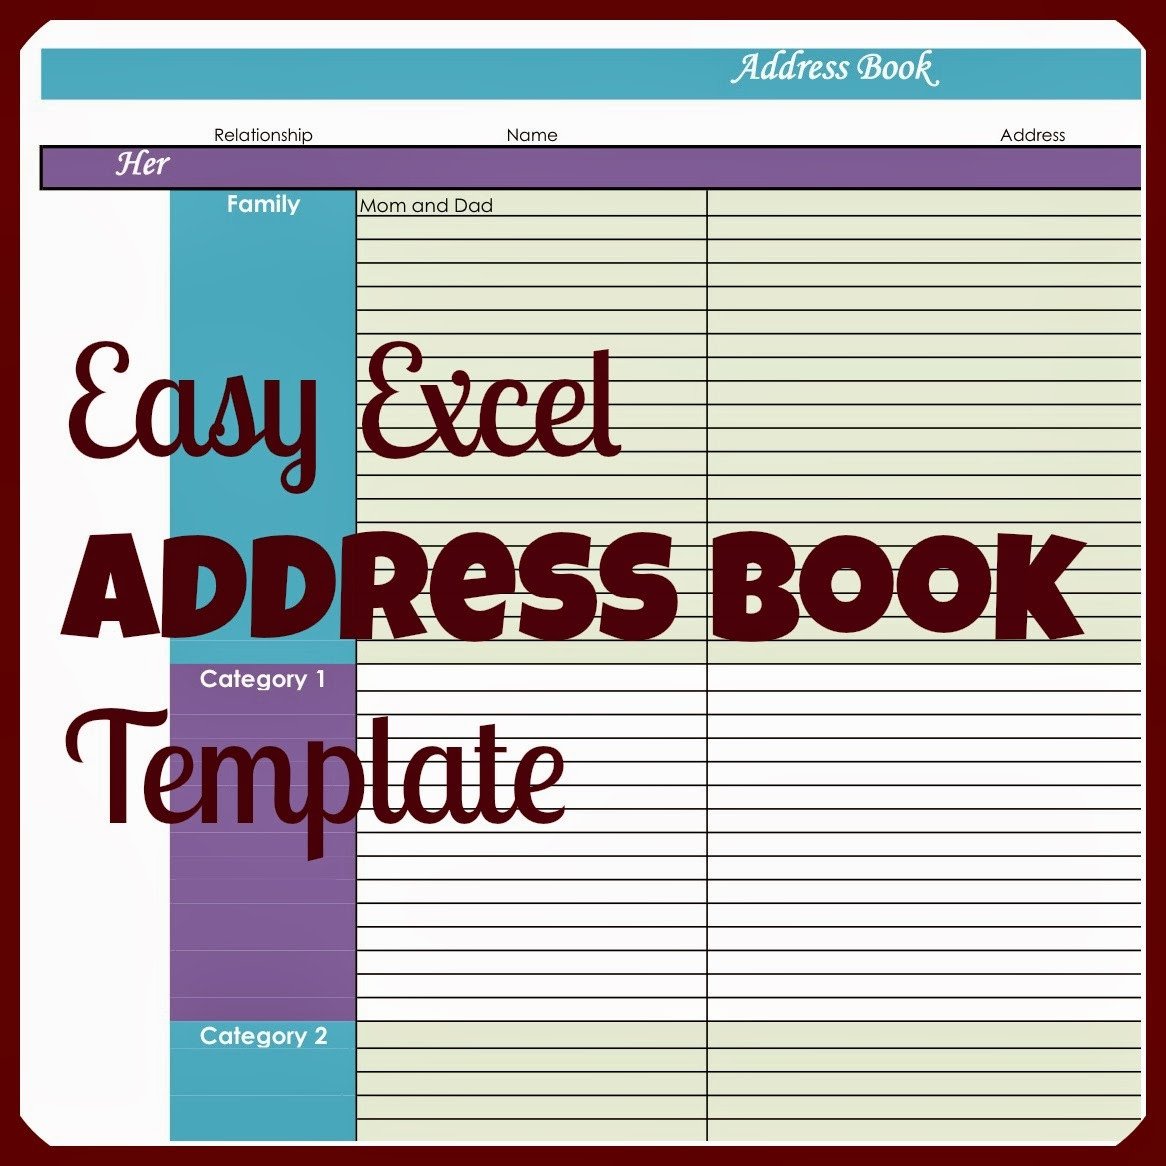 Address Book Template Excel Laura S Plans Easy Excel Address Book Template